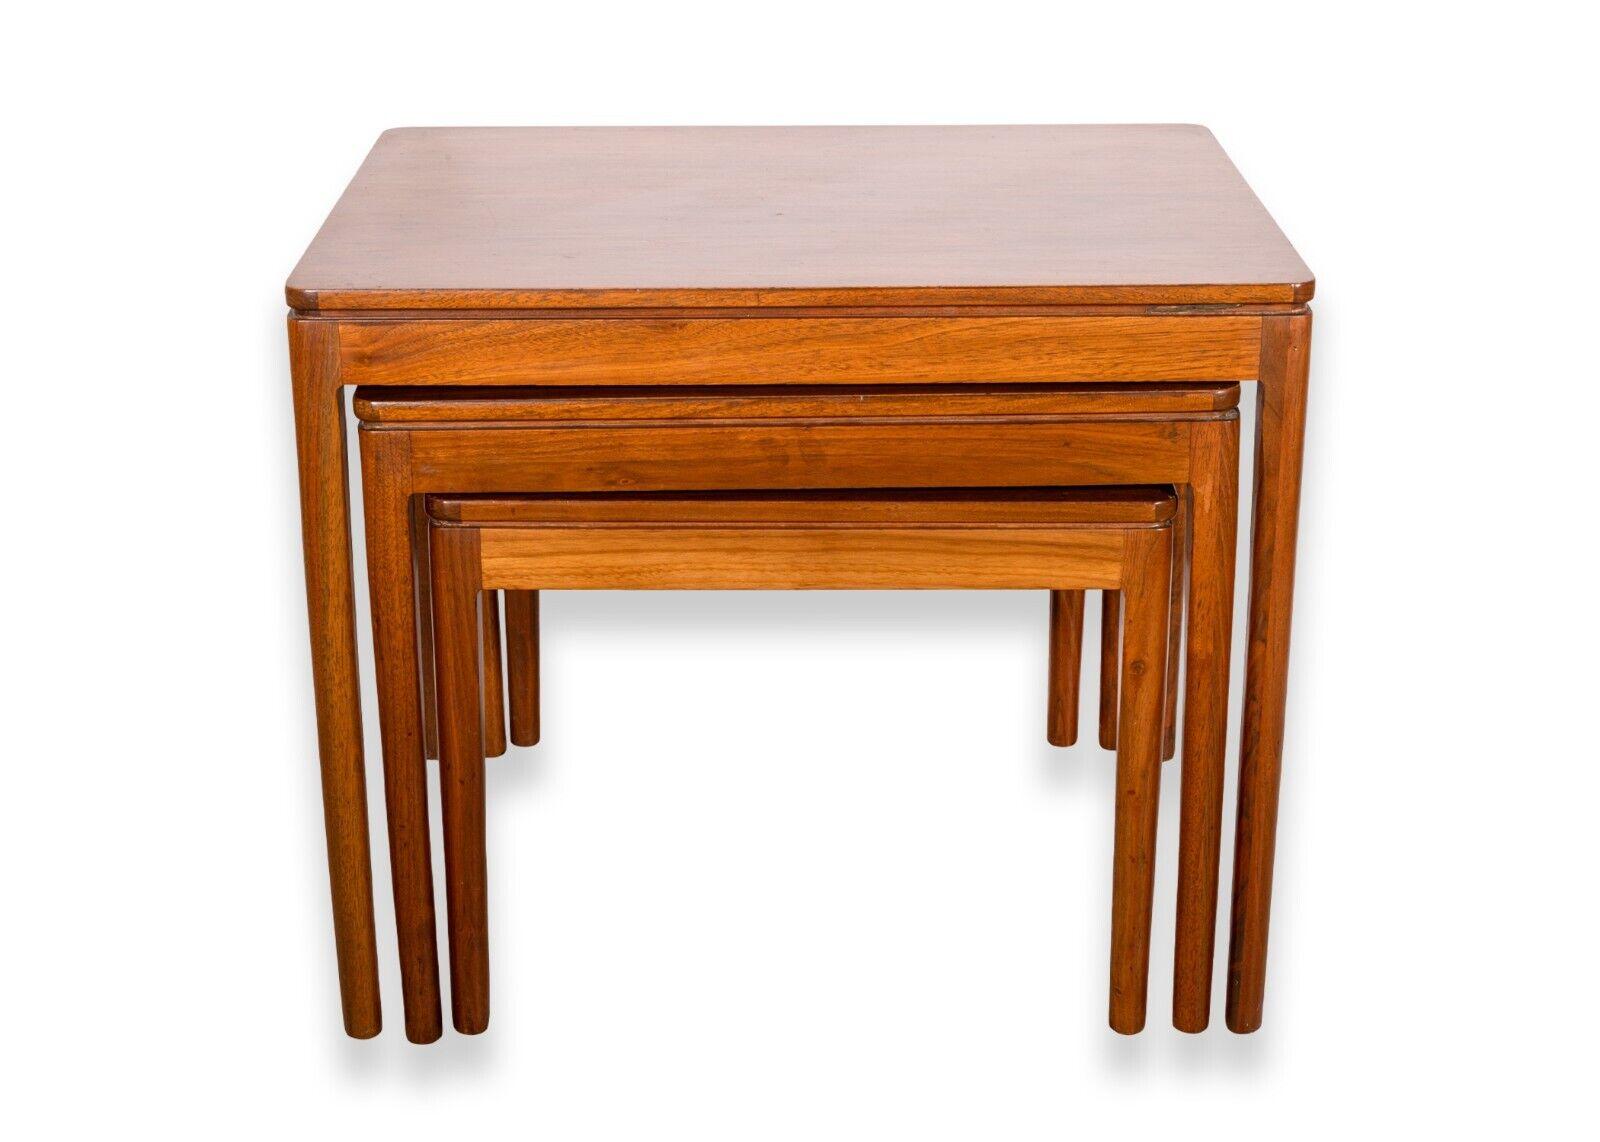 A set of 3 Drexel Declaration mid century modern walnut wood nesting side end tables. A wonderful set of nesting tables featuring a rich walnut wood construction. These tables feature a simple mid century modern design with rounded legs and a